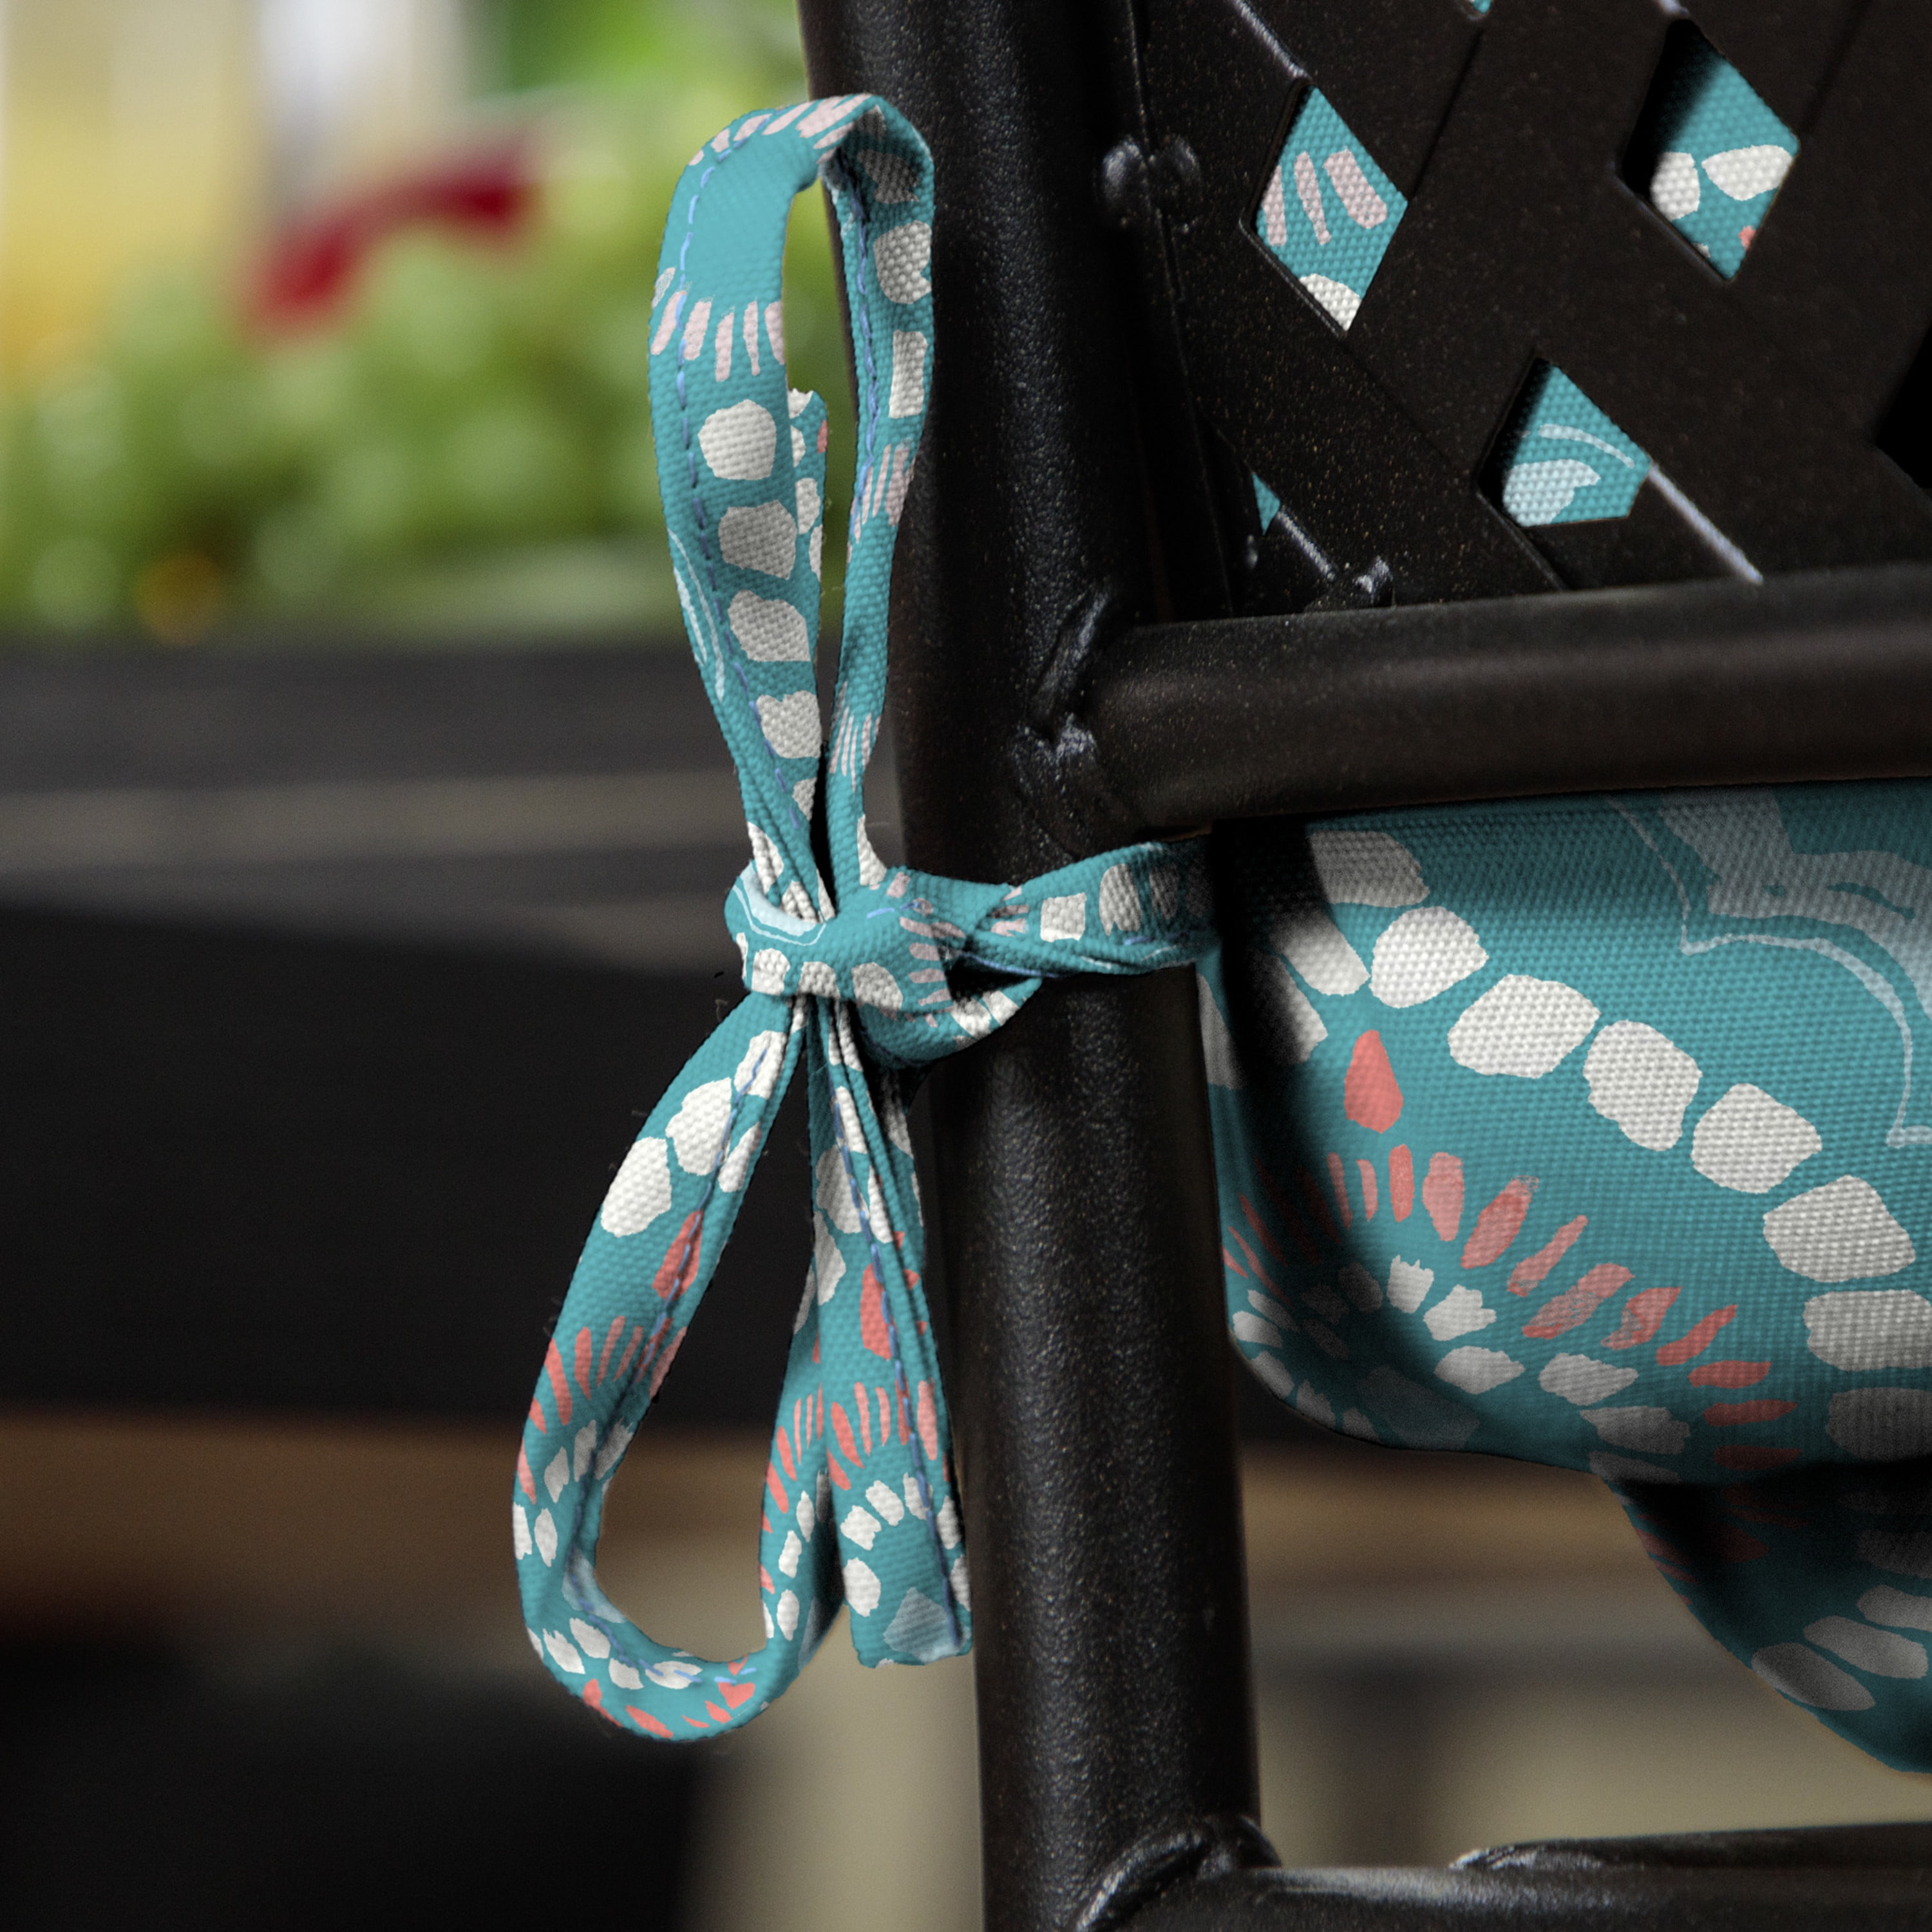 Mainstays 44 x 21 Turquoise Medallion Rectangle Outdoor Chair